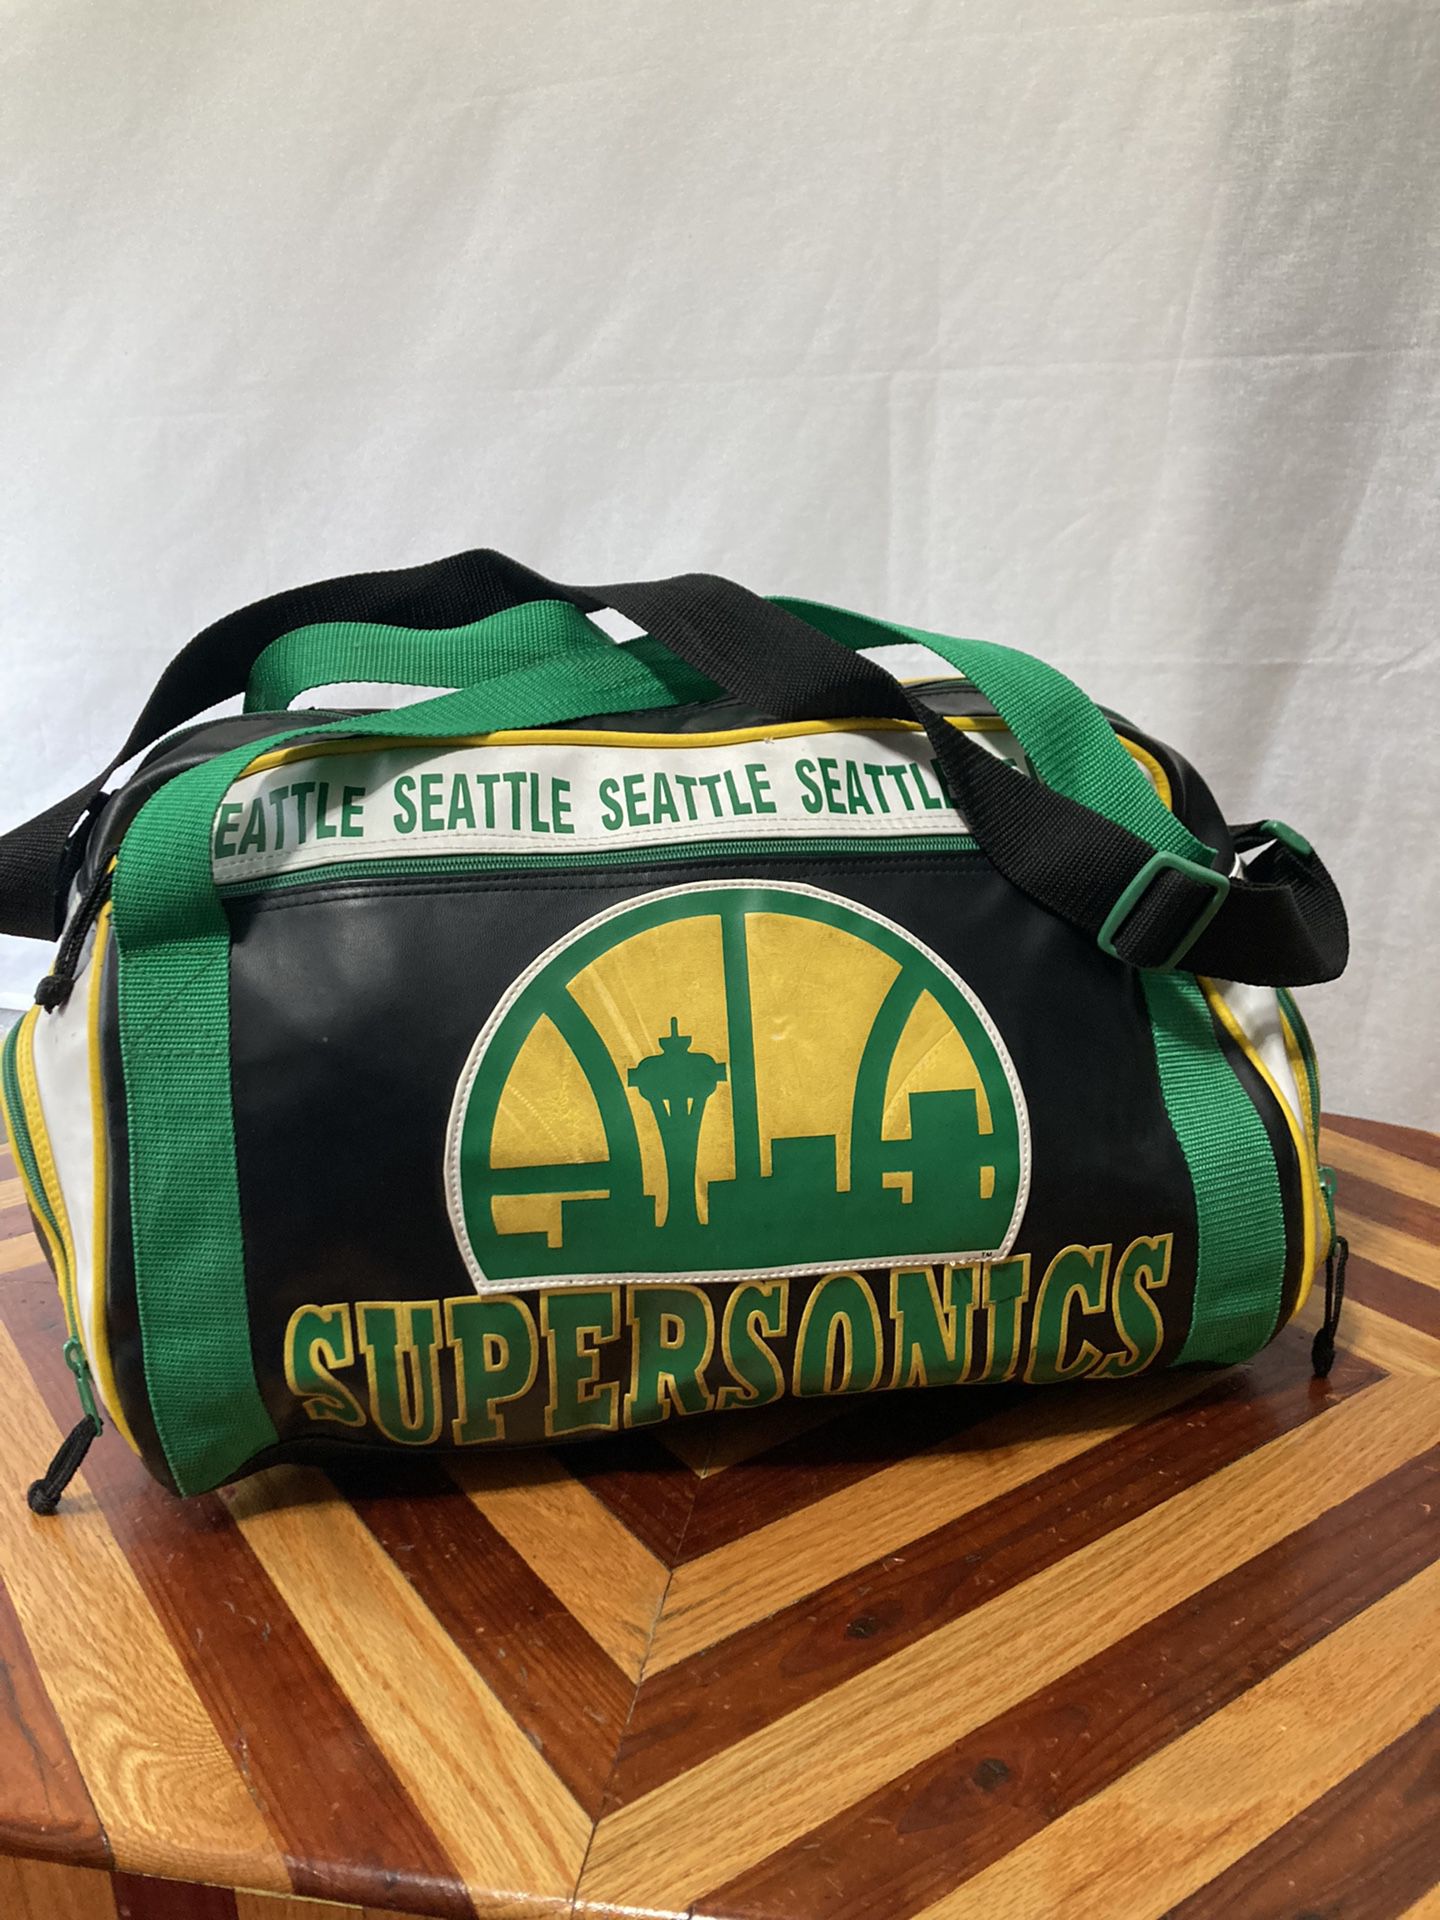 VTG 80s SEATTLE SUPERSONICS Player Issue Bag NBA Leather Duffle Bag Basketball